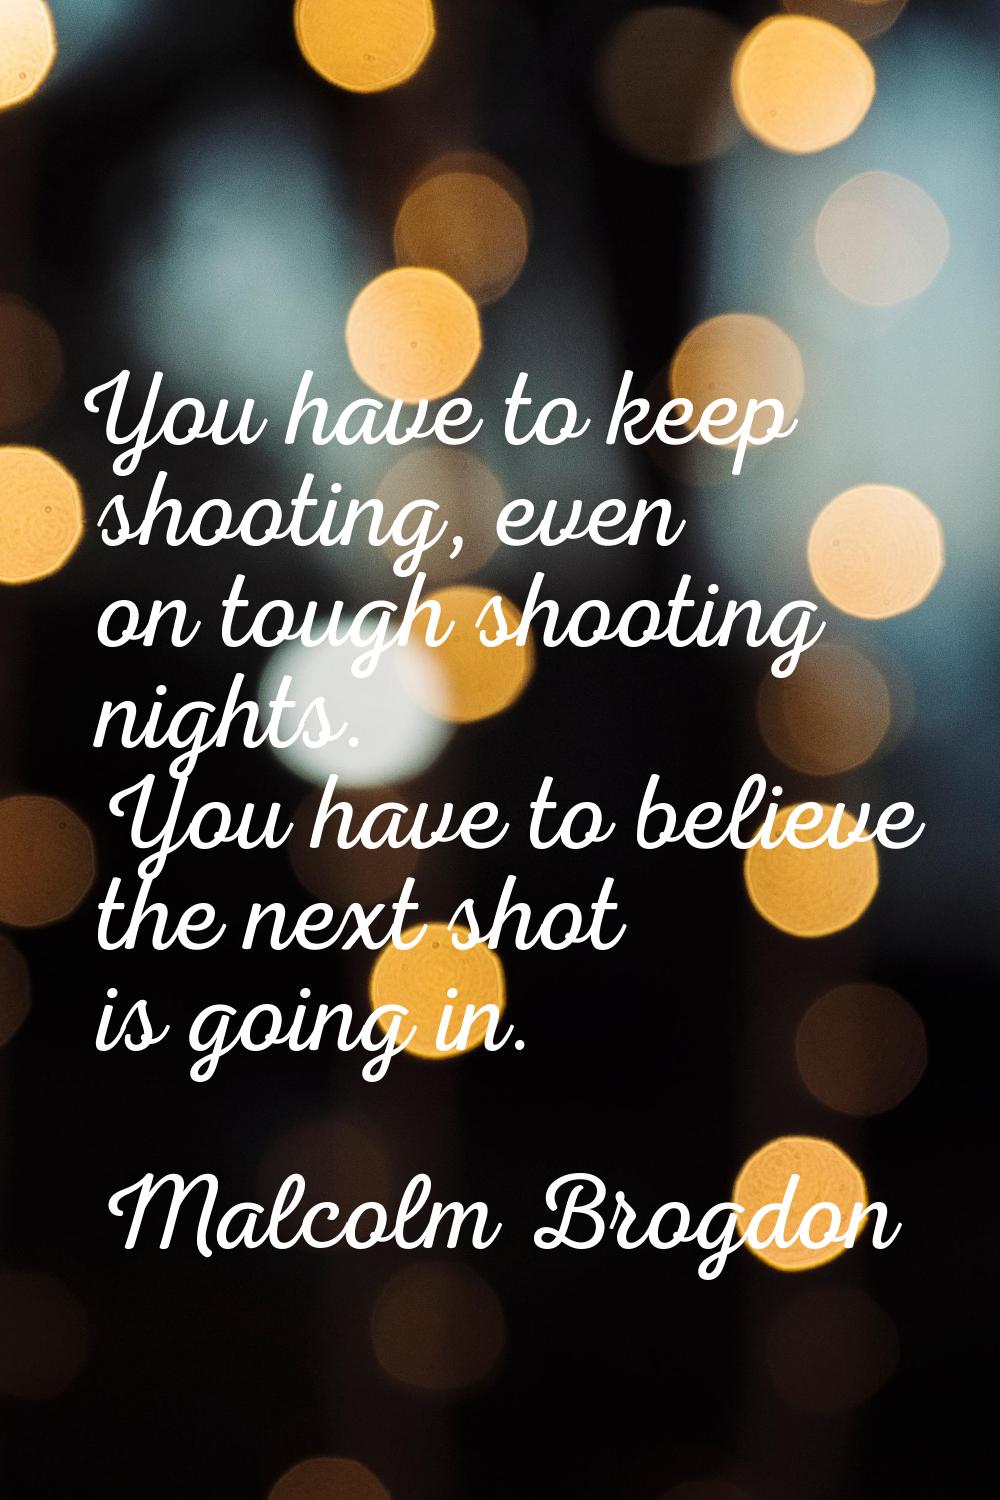 You have to keep shooting, even on tough shooting nights. You have to believe the next shot is goin